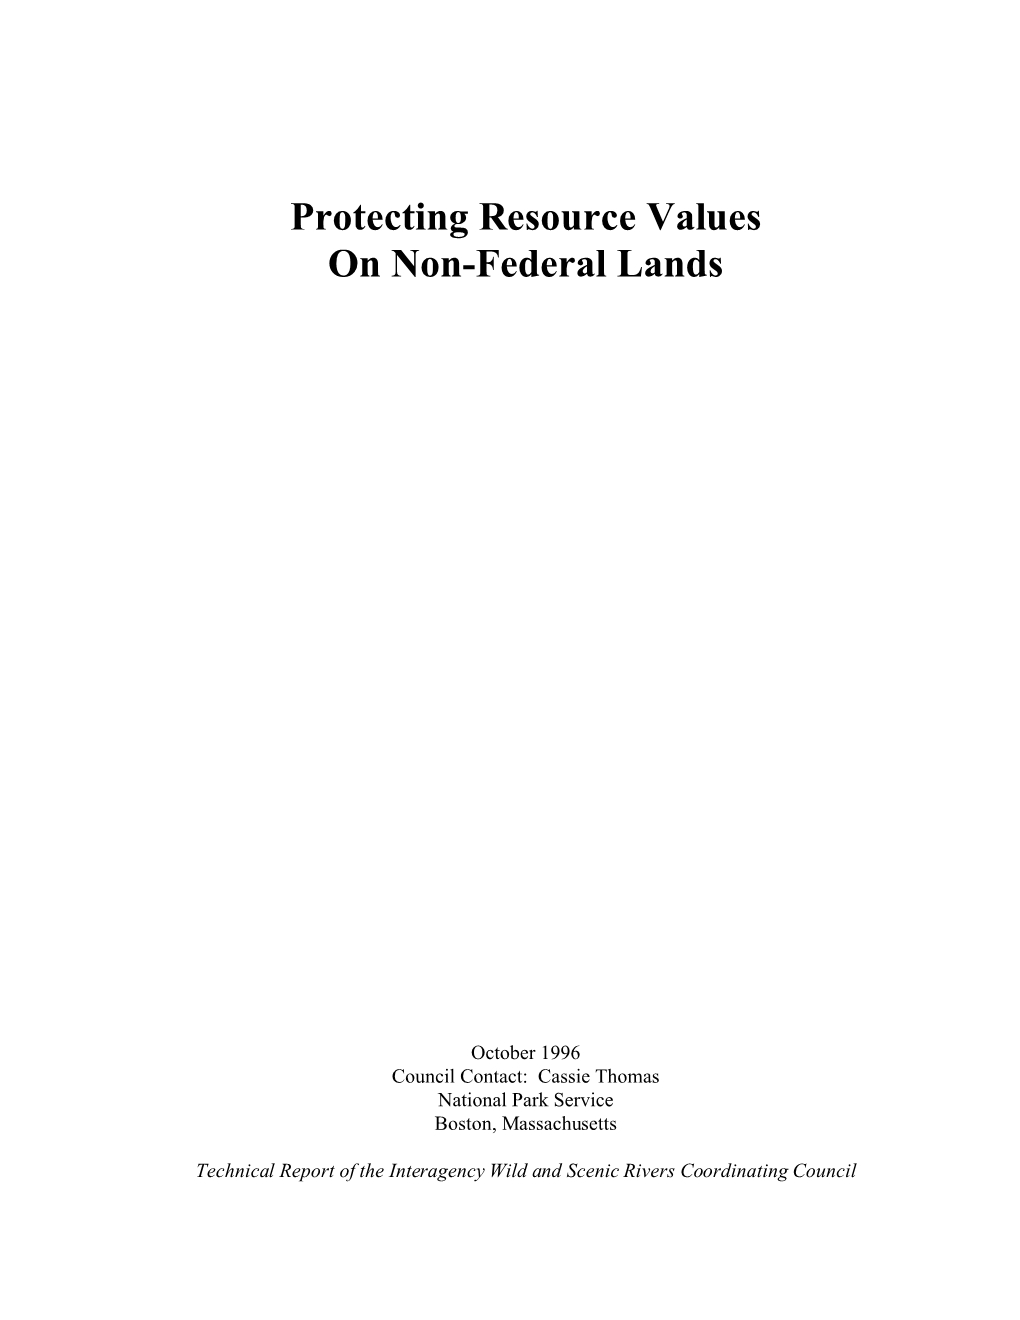 Protecting Resource Values on Non-Federal Lands